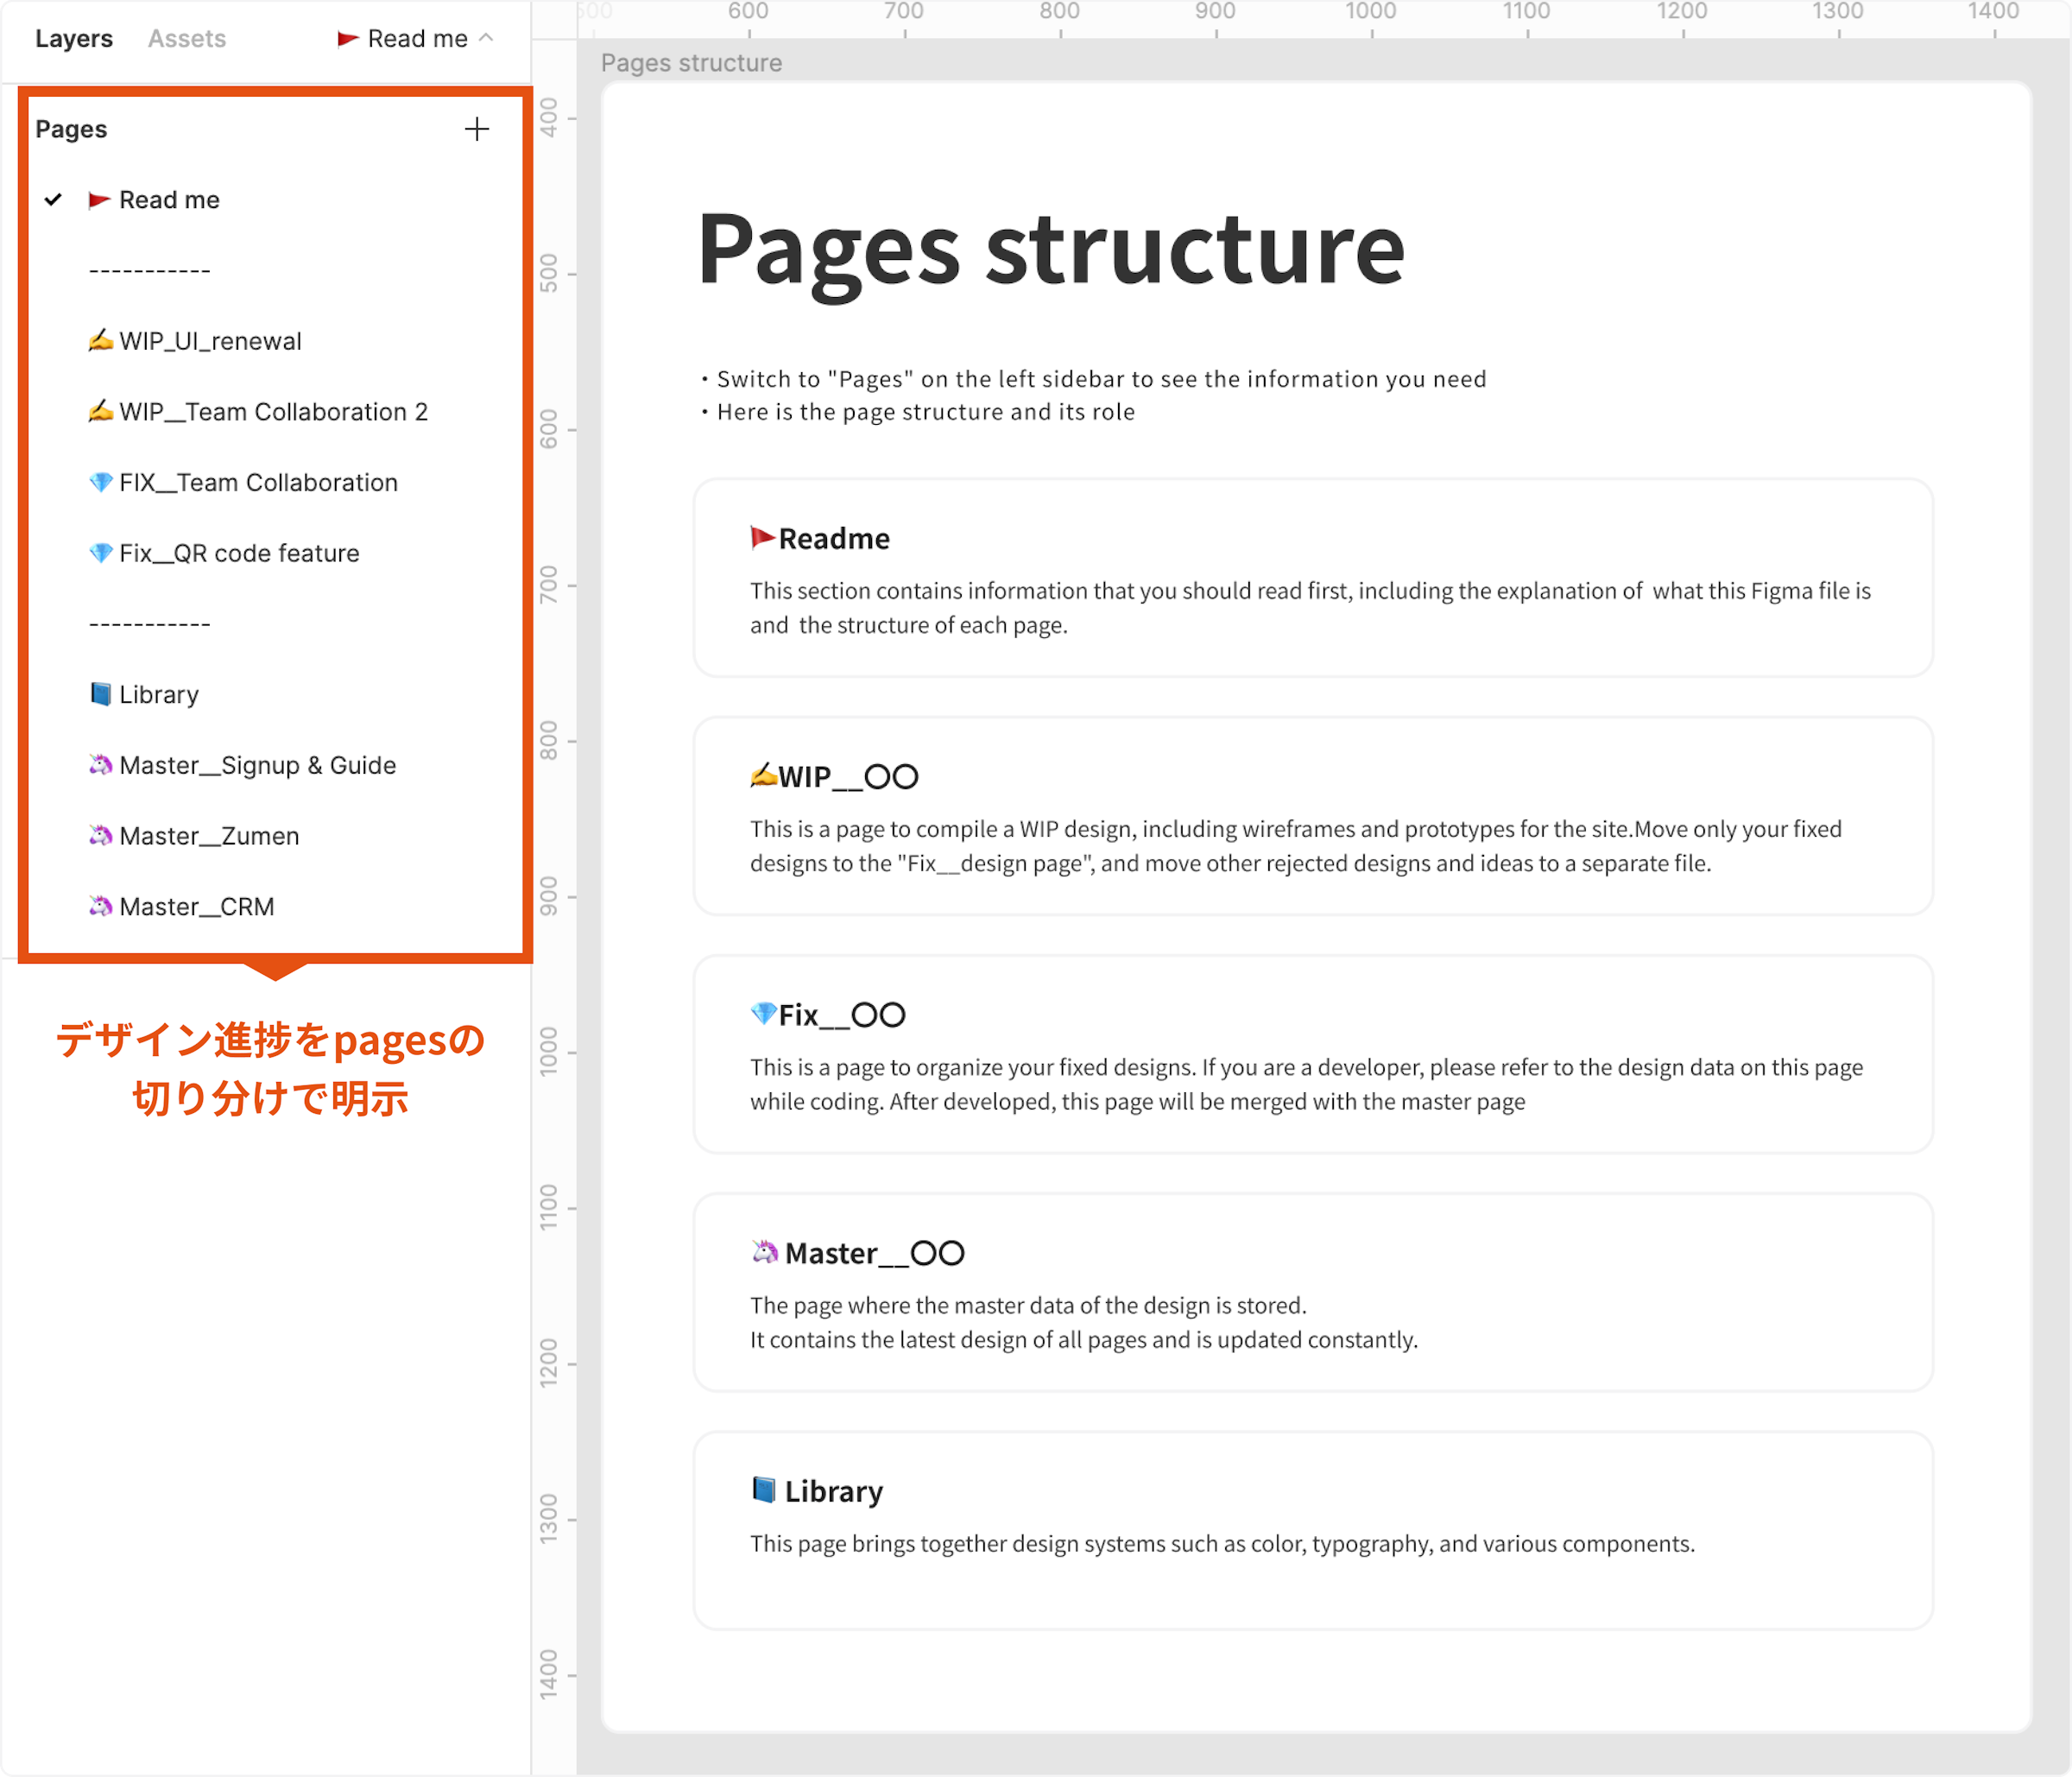 Pages structureの画像。Readme、WIP_〇〇などが並んでいる。デザイン進捗をpagesの切り分けで明示。